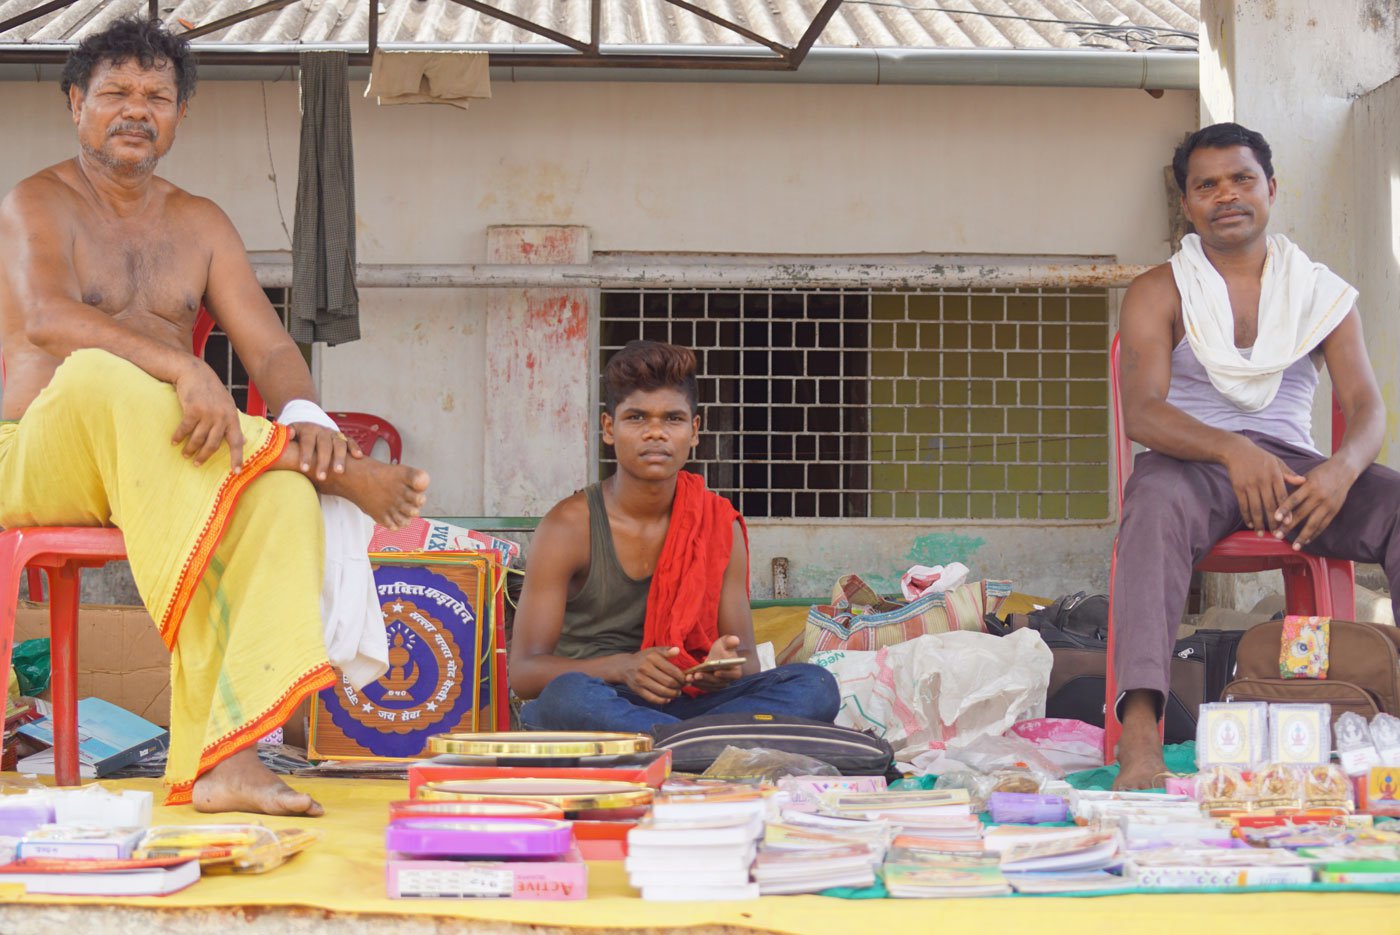 Rampyari Kawachi (attired in yellow) and his helpers selling books on a hot summer afternoon at an Adivasi mela in Sukma district